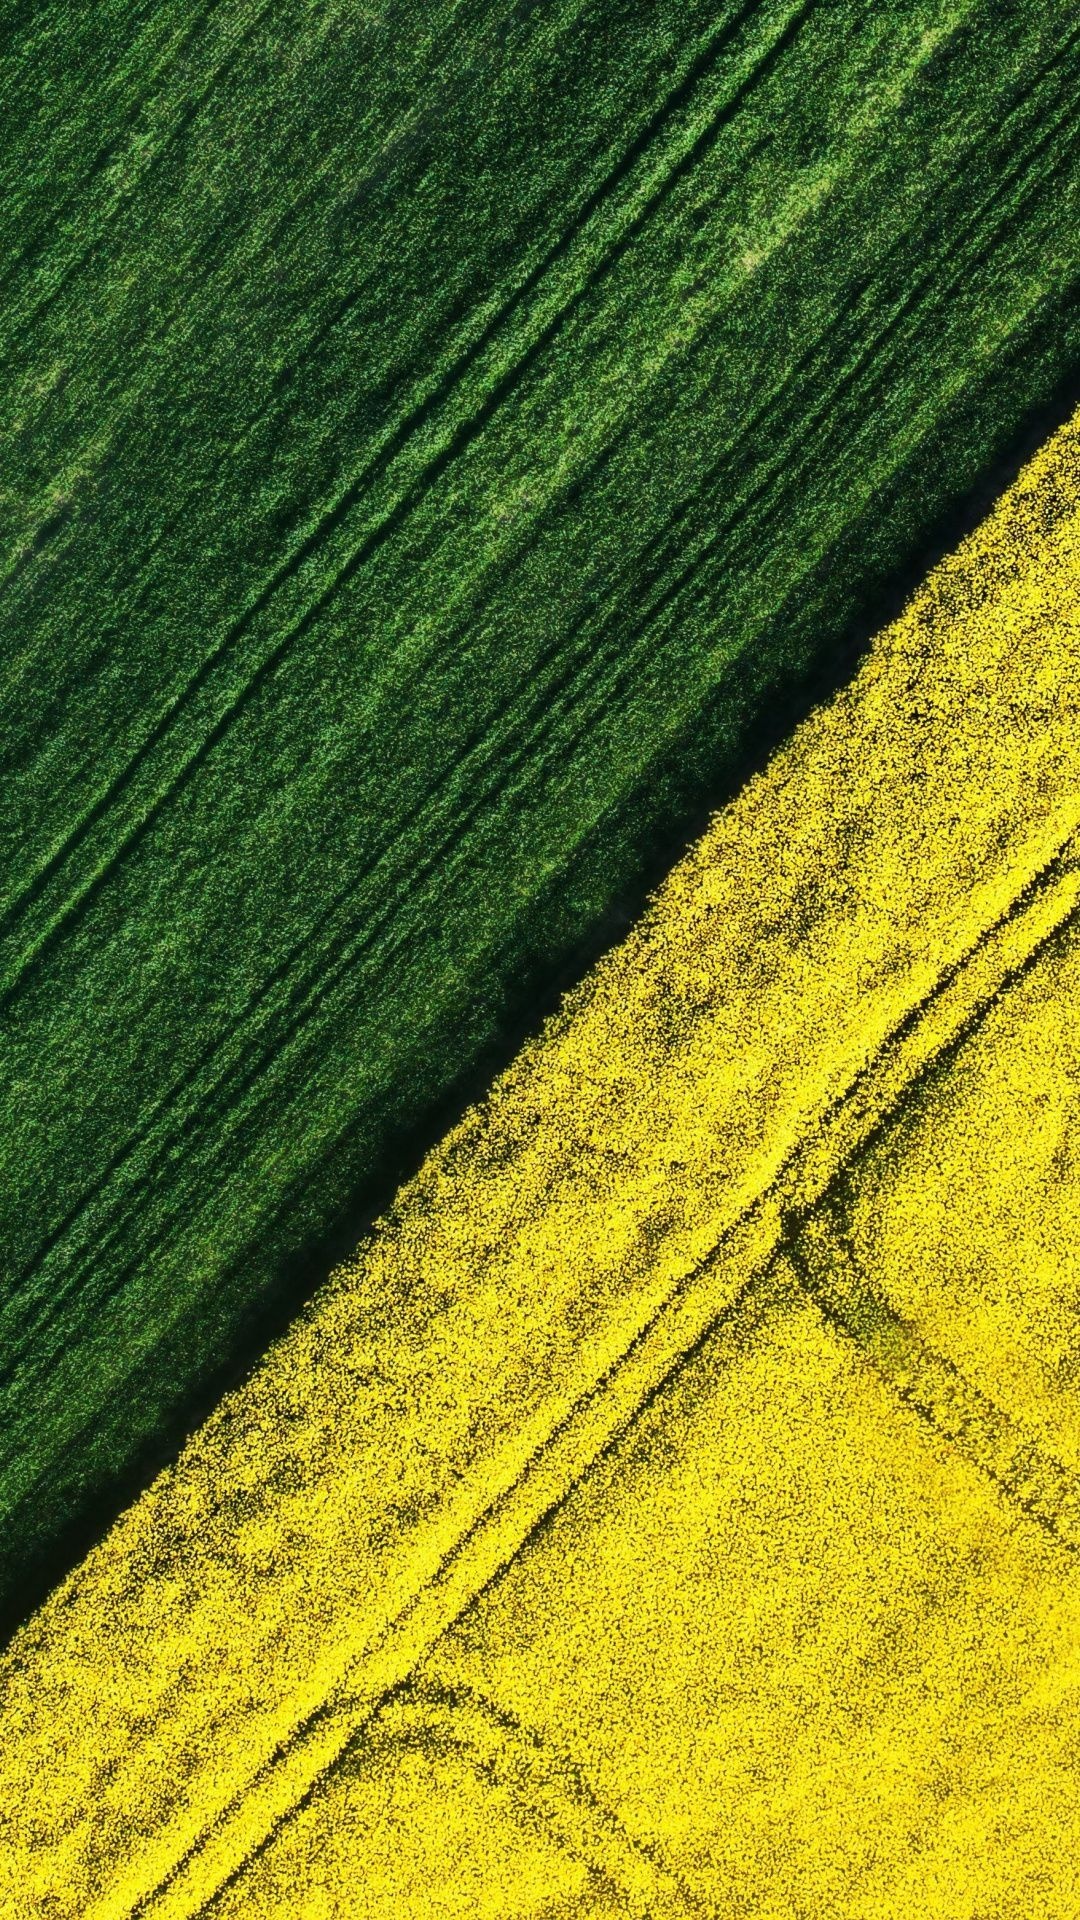 Farm: An area of land, used for growing crops, Aerial view. 1080x1920 Full HD Wallpaper.